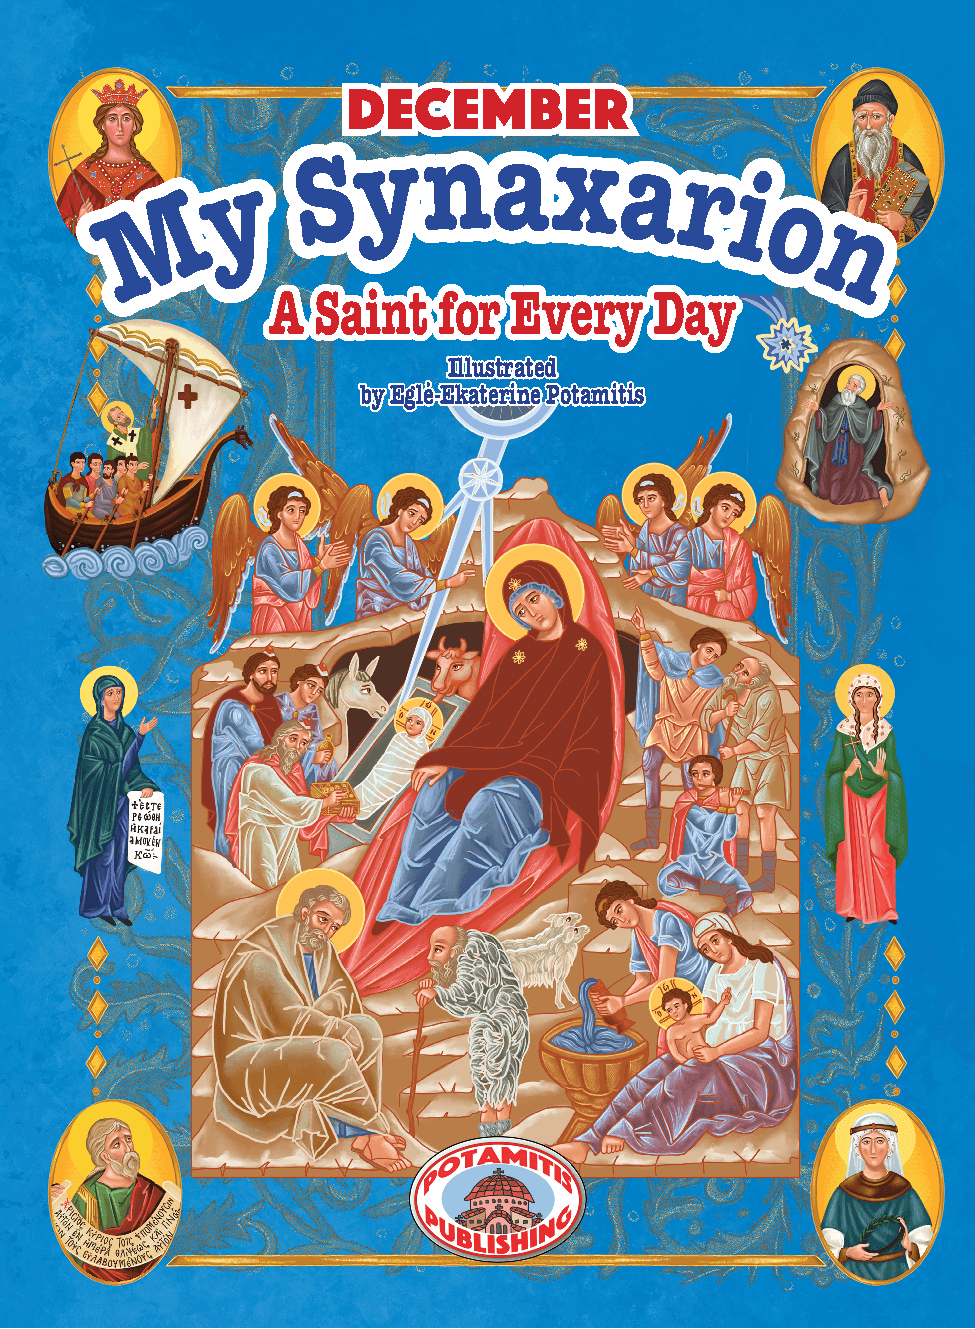 My Synaxarion - A Saint for Every Day [December] - Holy Cross Monastery